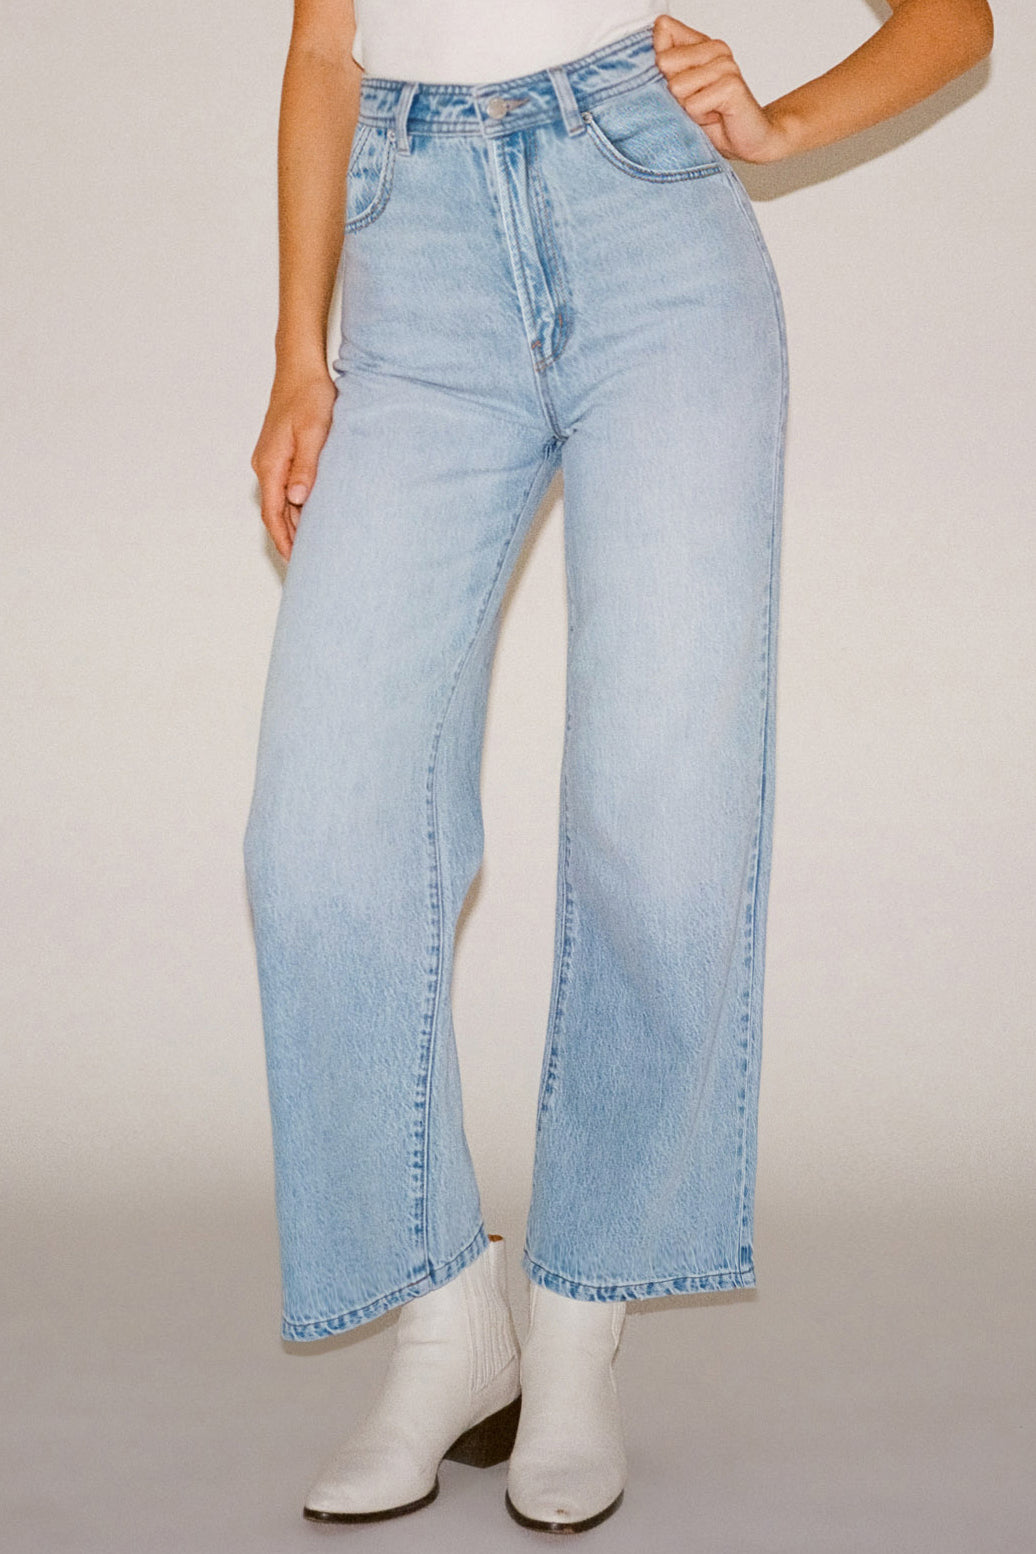 ROLLAS HEIDI JEAN - ORGANIC LIGHT BLUE  The Rollas Heidi Jeans are comfortable, soft and flattering jeans now available in; Organic Light Blue. 